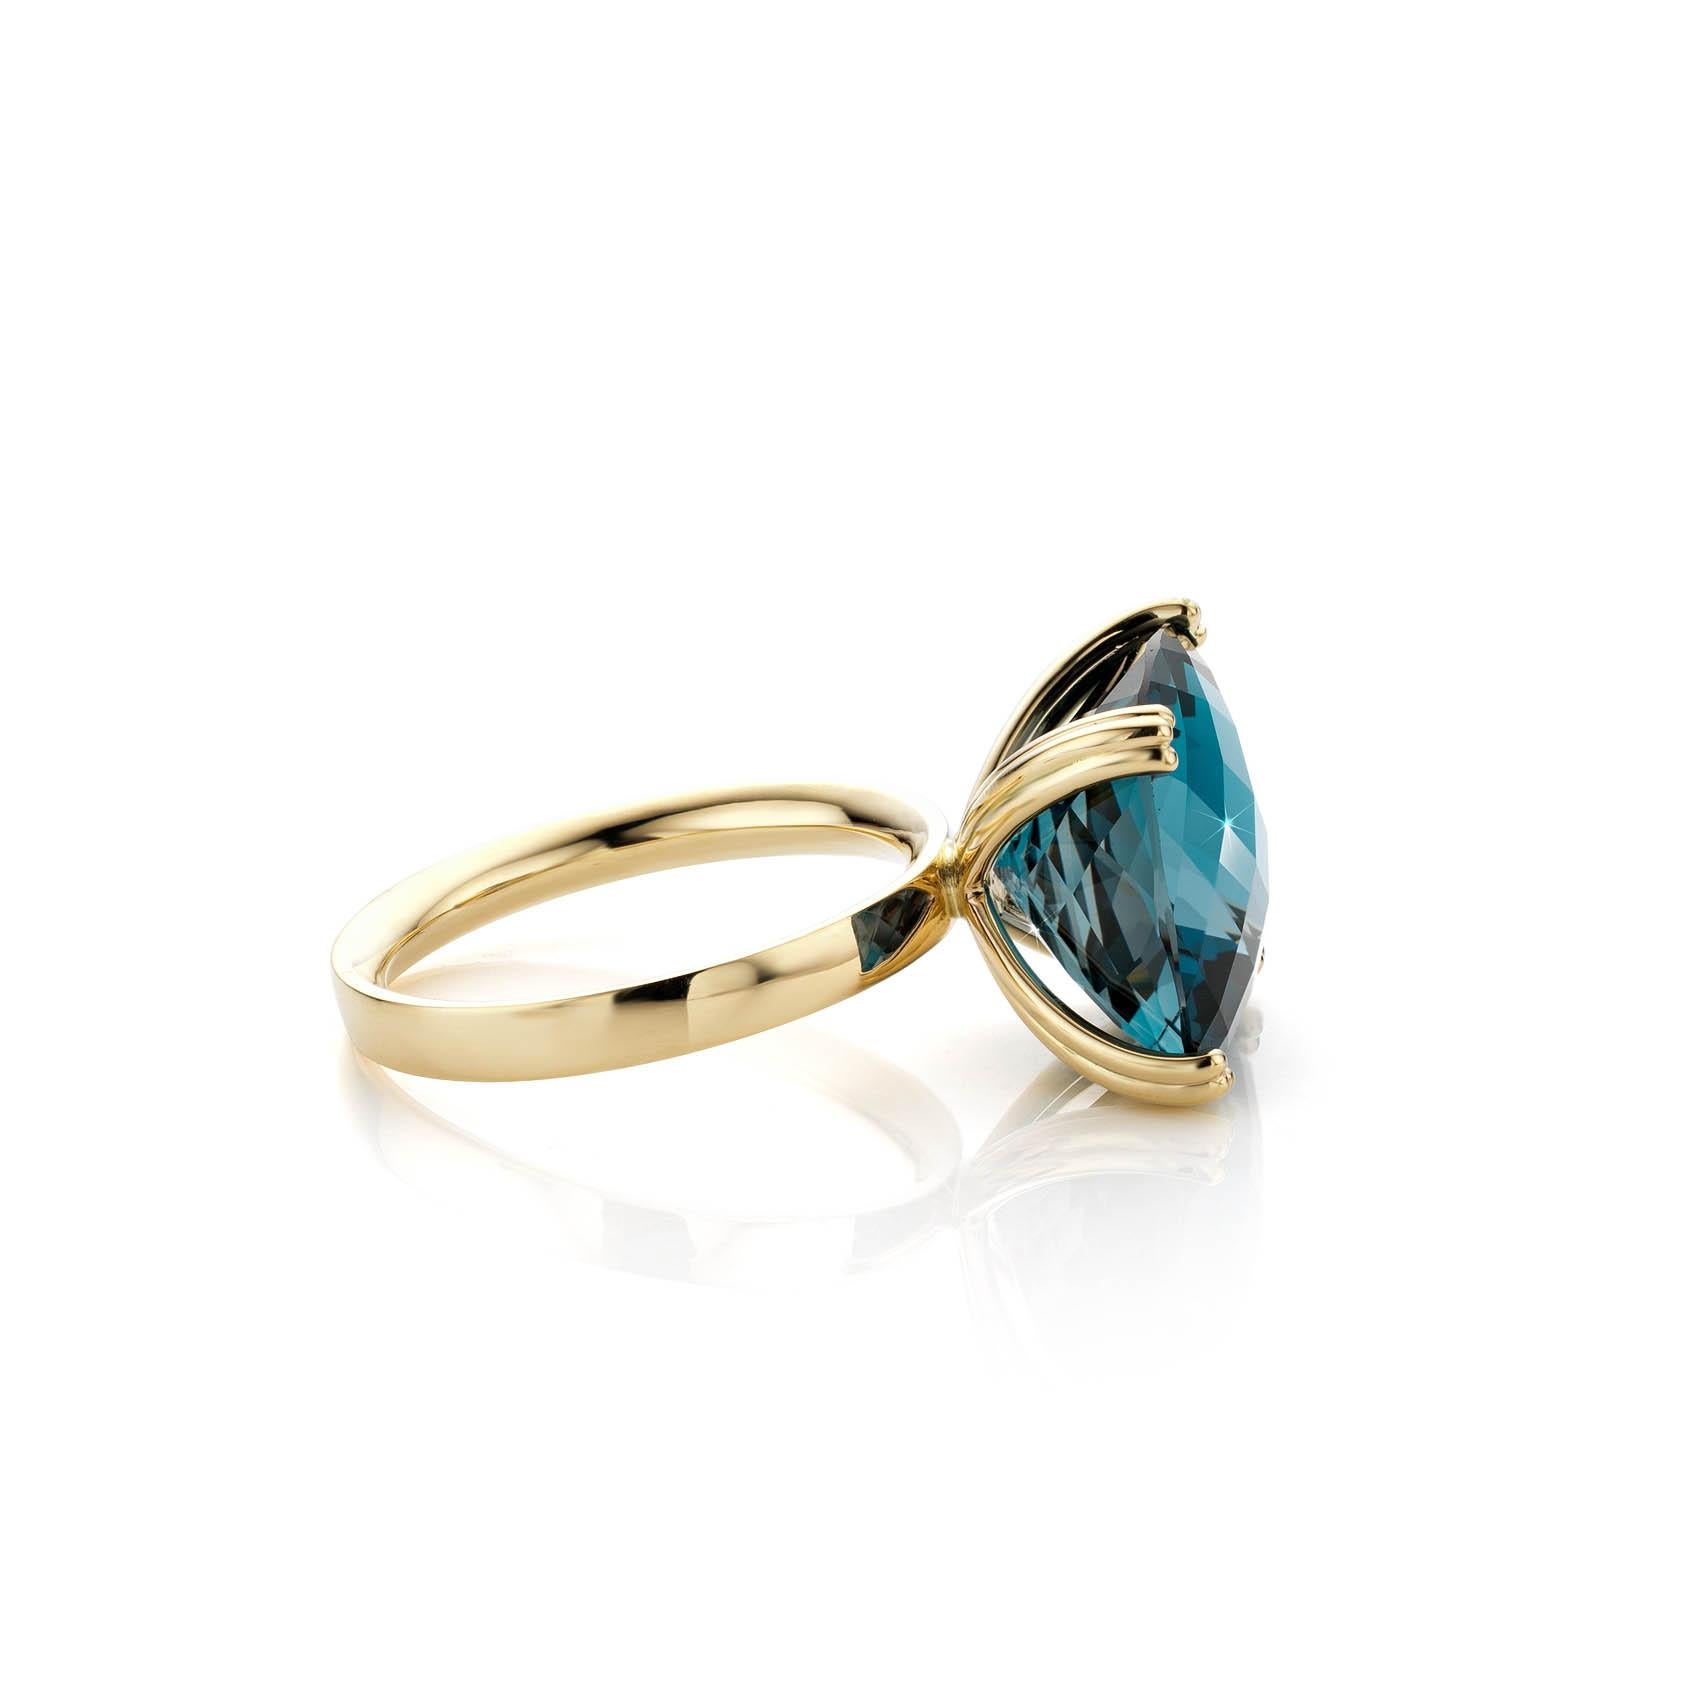 This is a 14 Carat yellow gold ring with a very beautiful “London blue” Topaz, in a cushion-cut. This ring is now available. Cober designs exclusive wedding rings, jewels and watches, all of them made by hand.
“The most distinctive jewellery